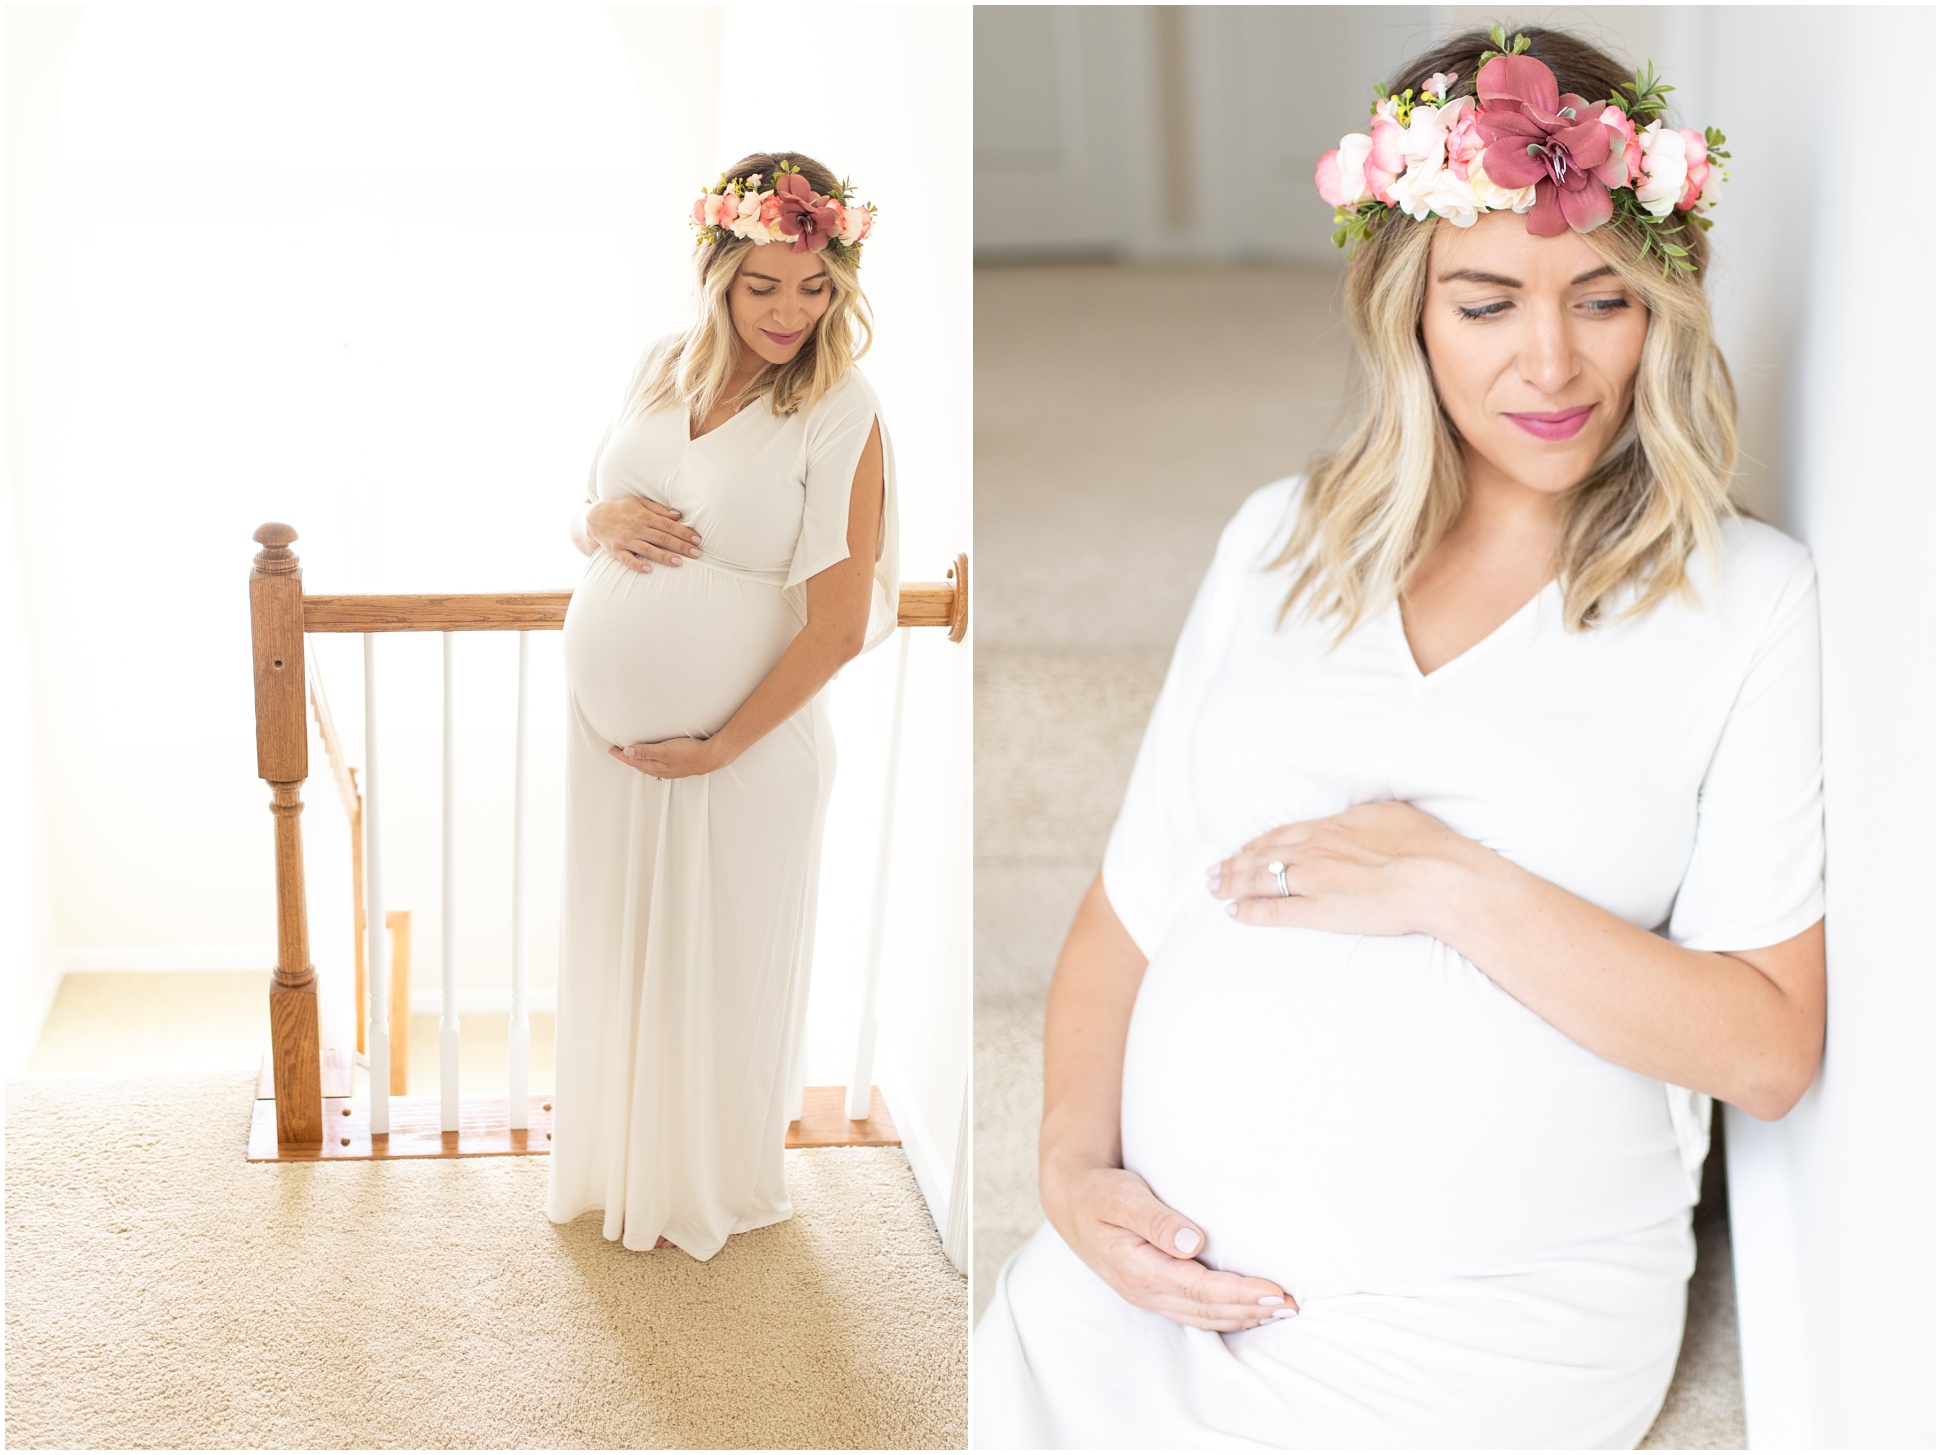 Mom to Be in White Dress with Flower Crown